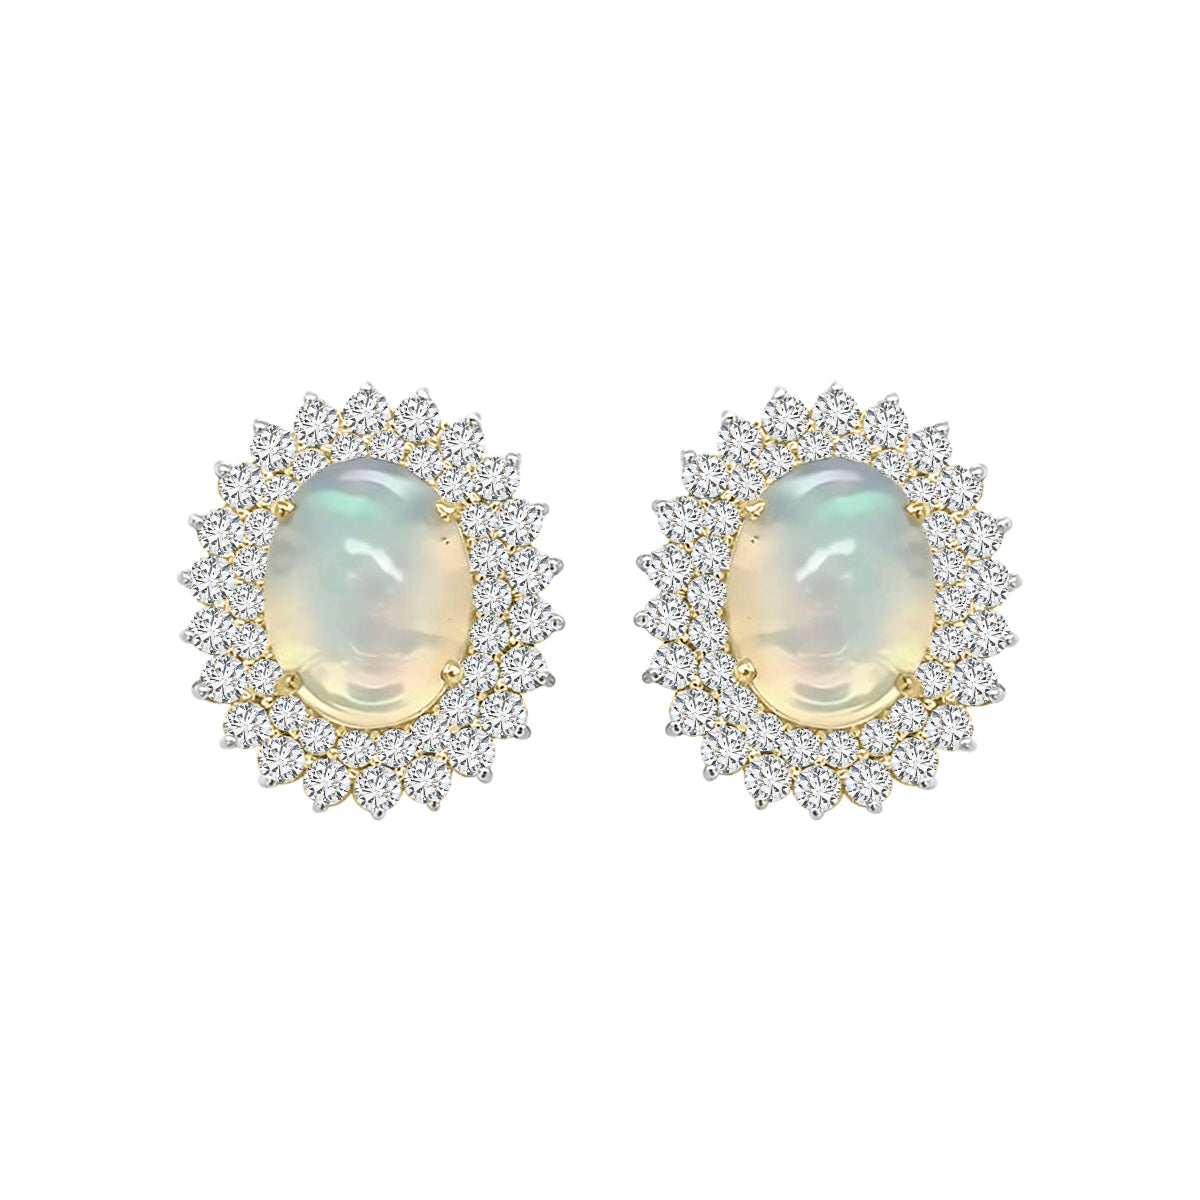 Double Diamond Halo And Opal Earrings In 18k Yellow Gold.